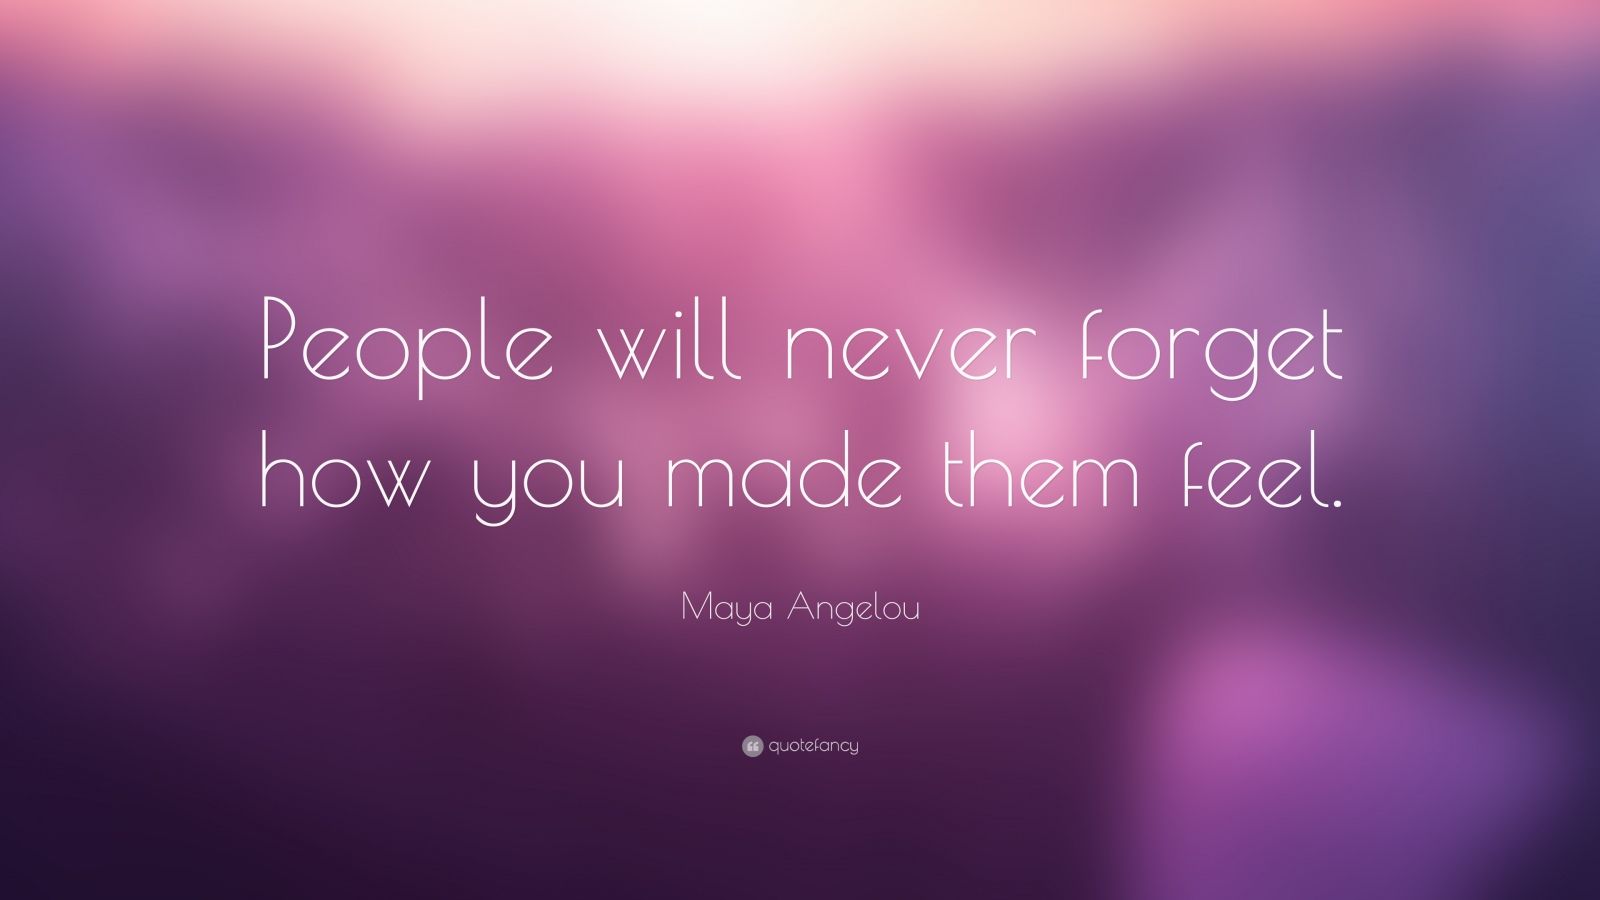 Maya Angelou Quote “People will never how you made